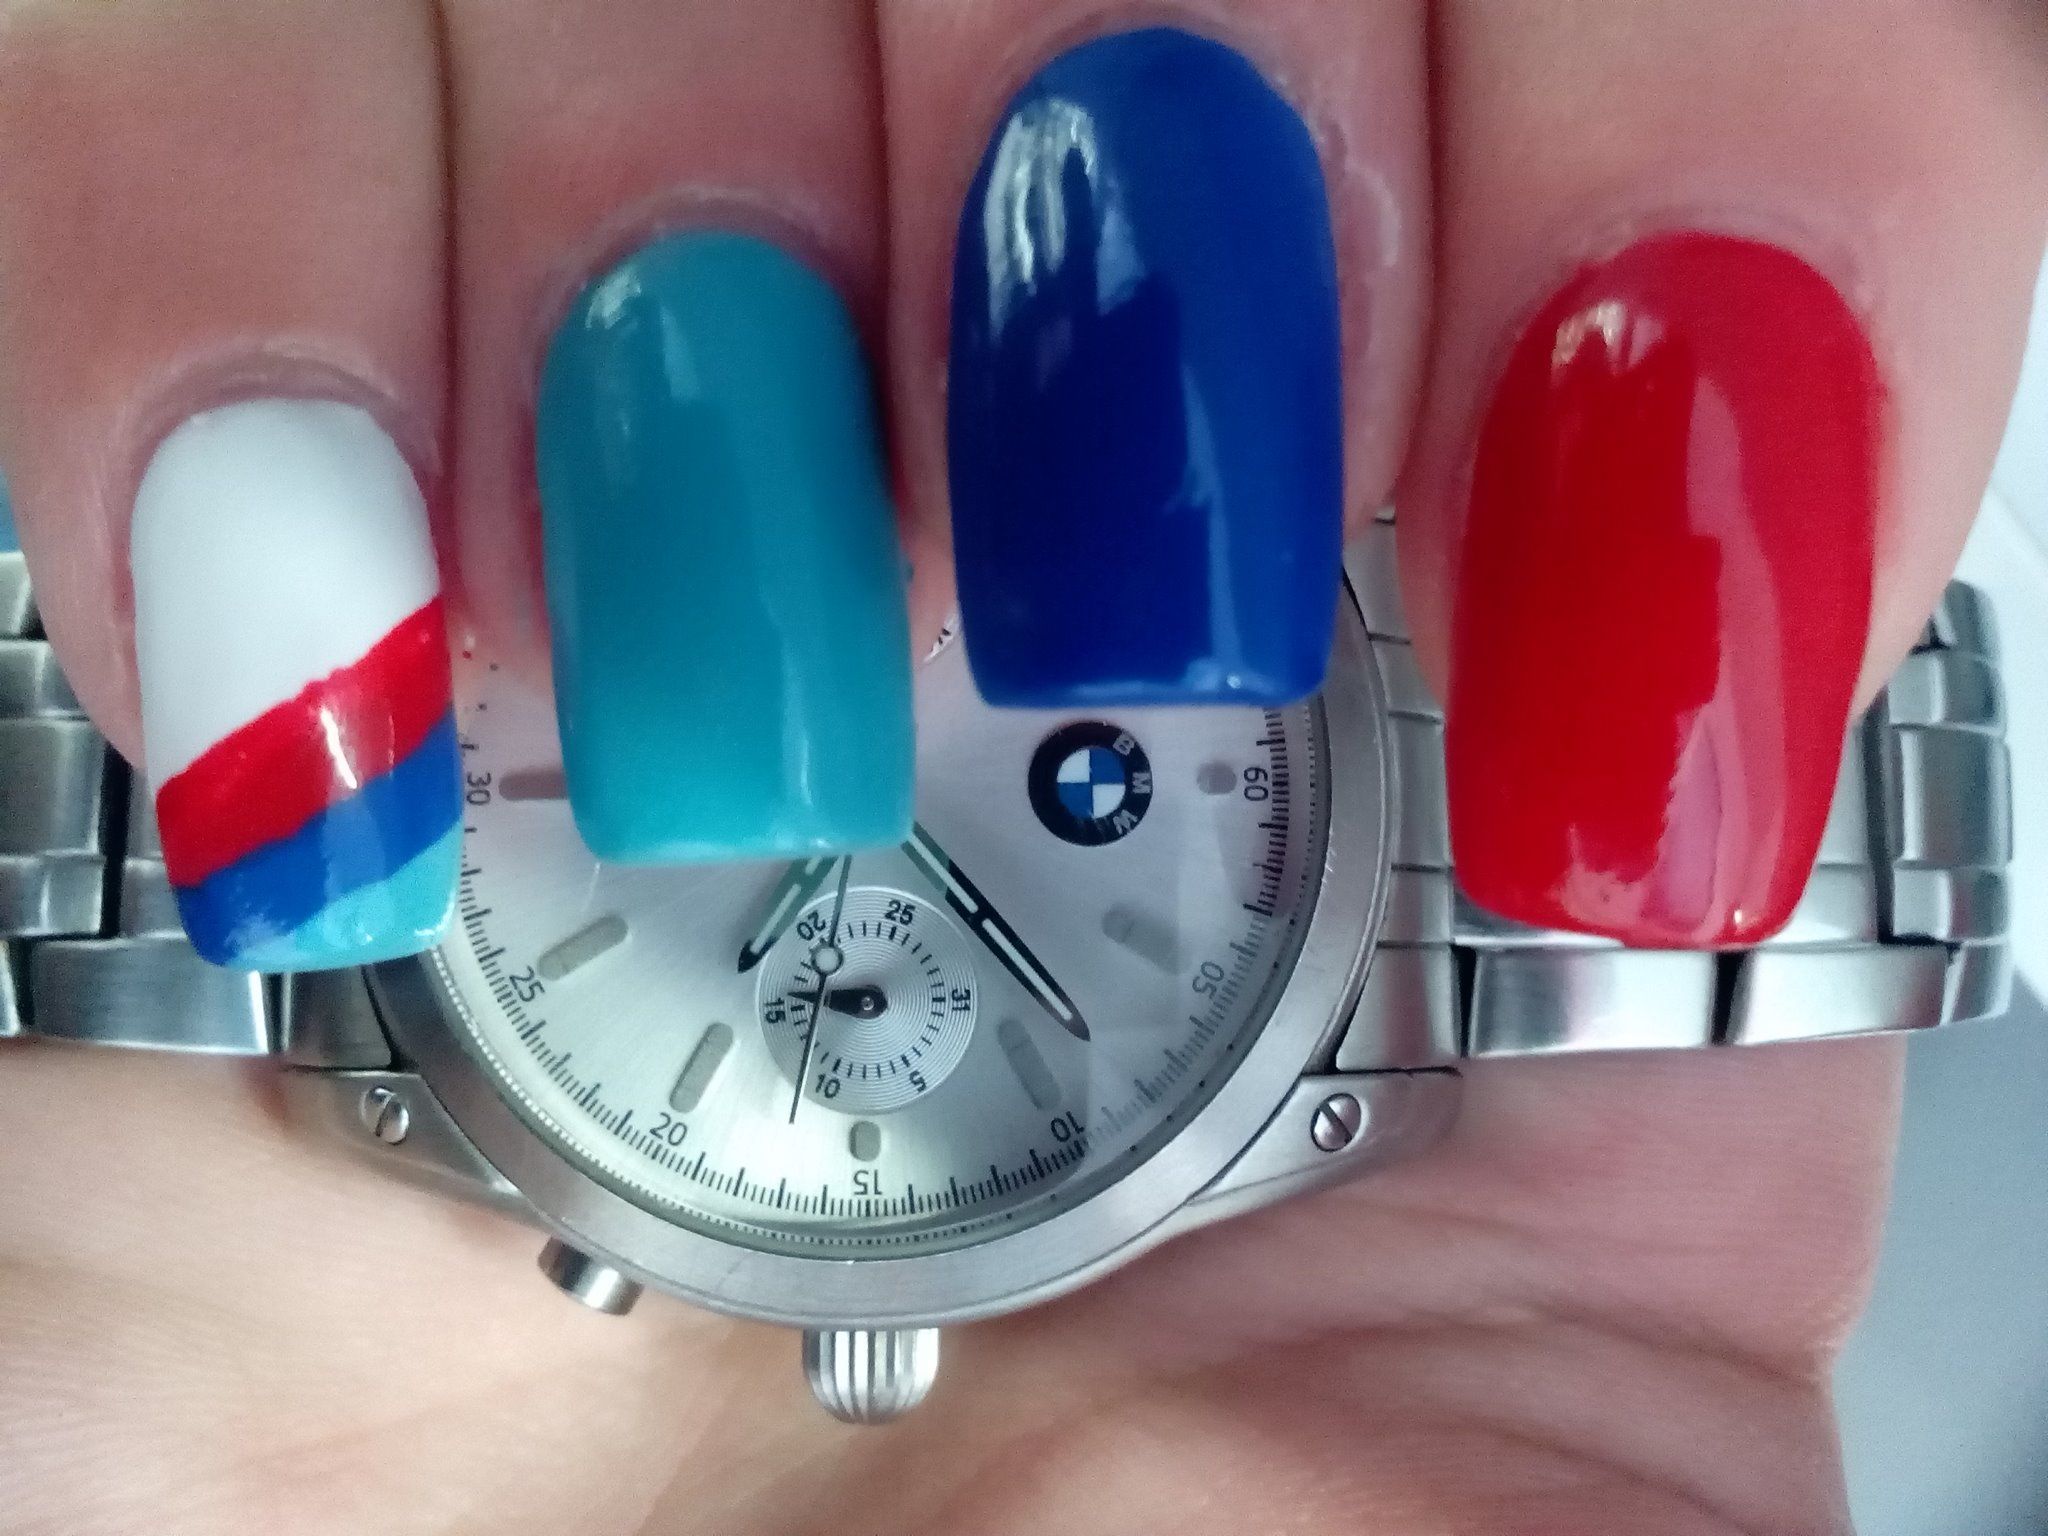 Repin This Bmw Watch Then Follow My Bmw Board For More Pins Bmw Design Bmw Nails Desing